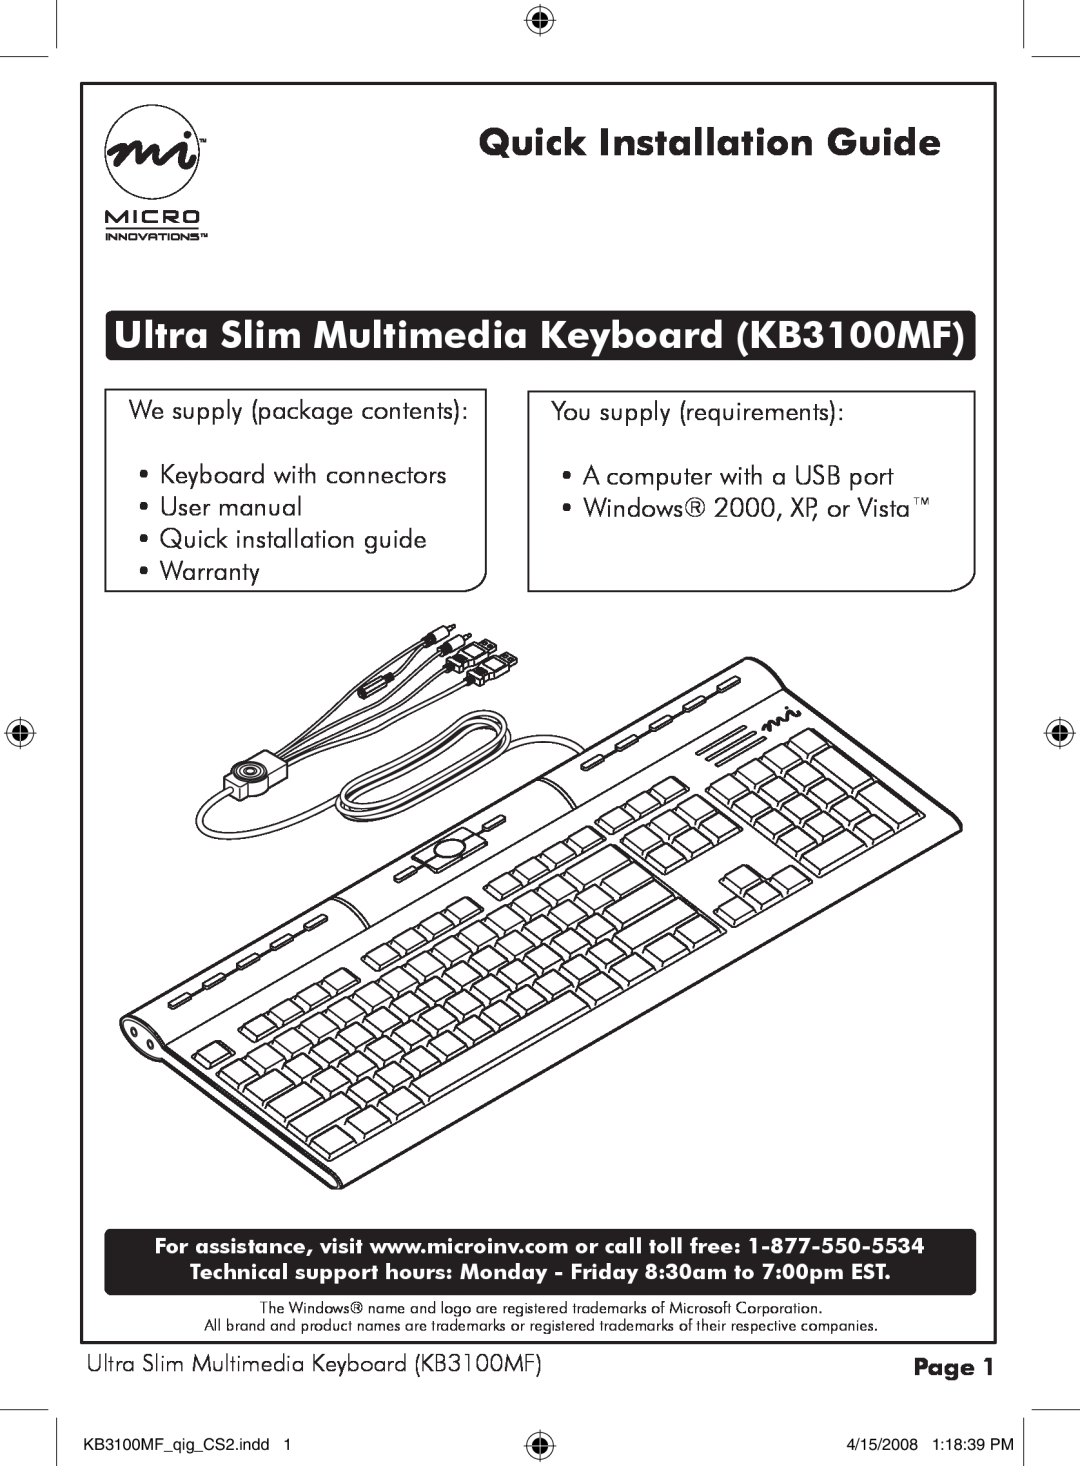 Micro Innovations user manual Quick Installation Guide, Ultra Slim Multimedia Keyboard KB3100MF, Page 